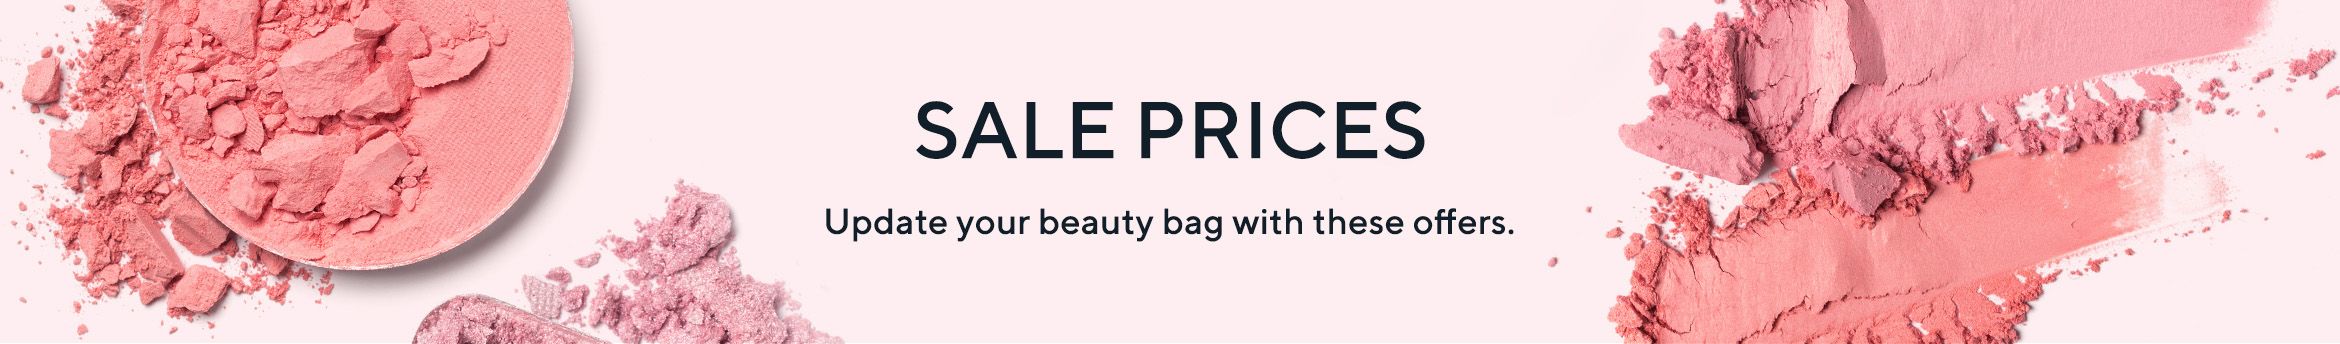 Sale Prices.  Update your beauty bag with these offers.